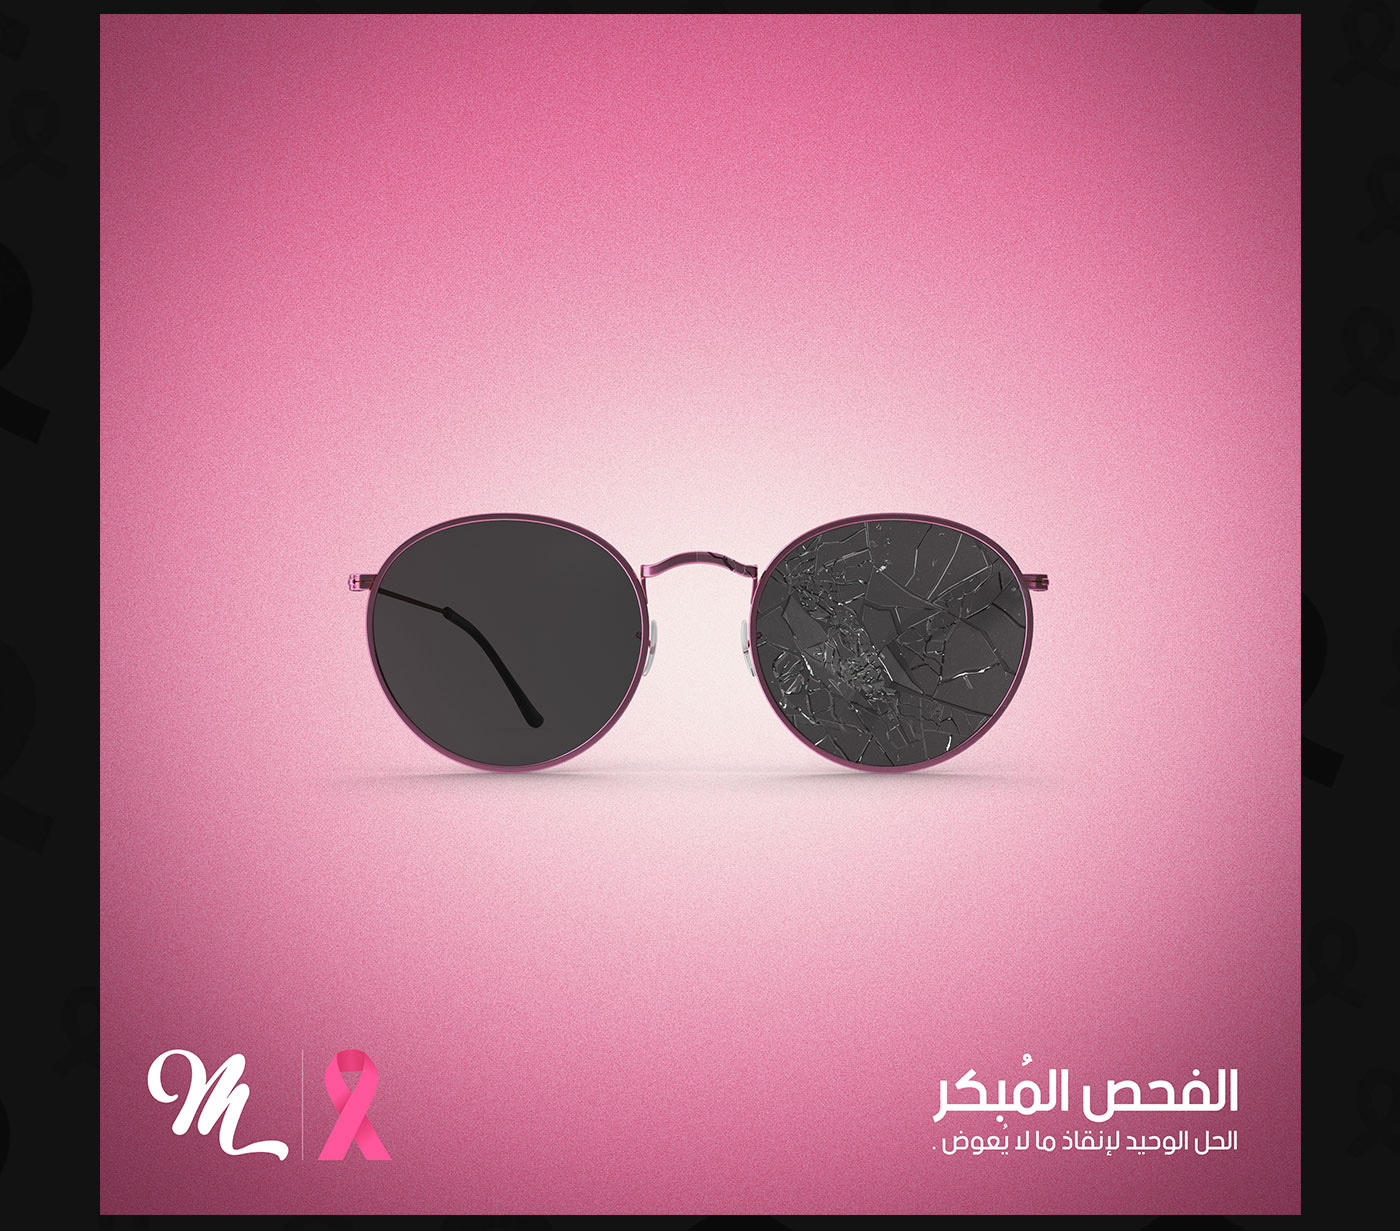 against cancer awareness breast cancer campaign cancer awareness Health women women health